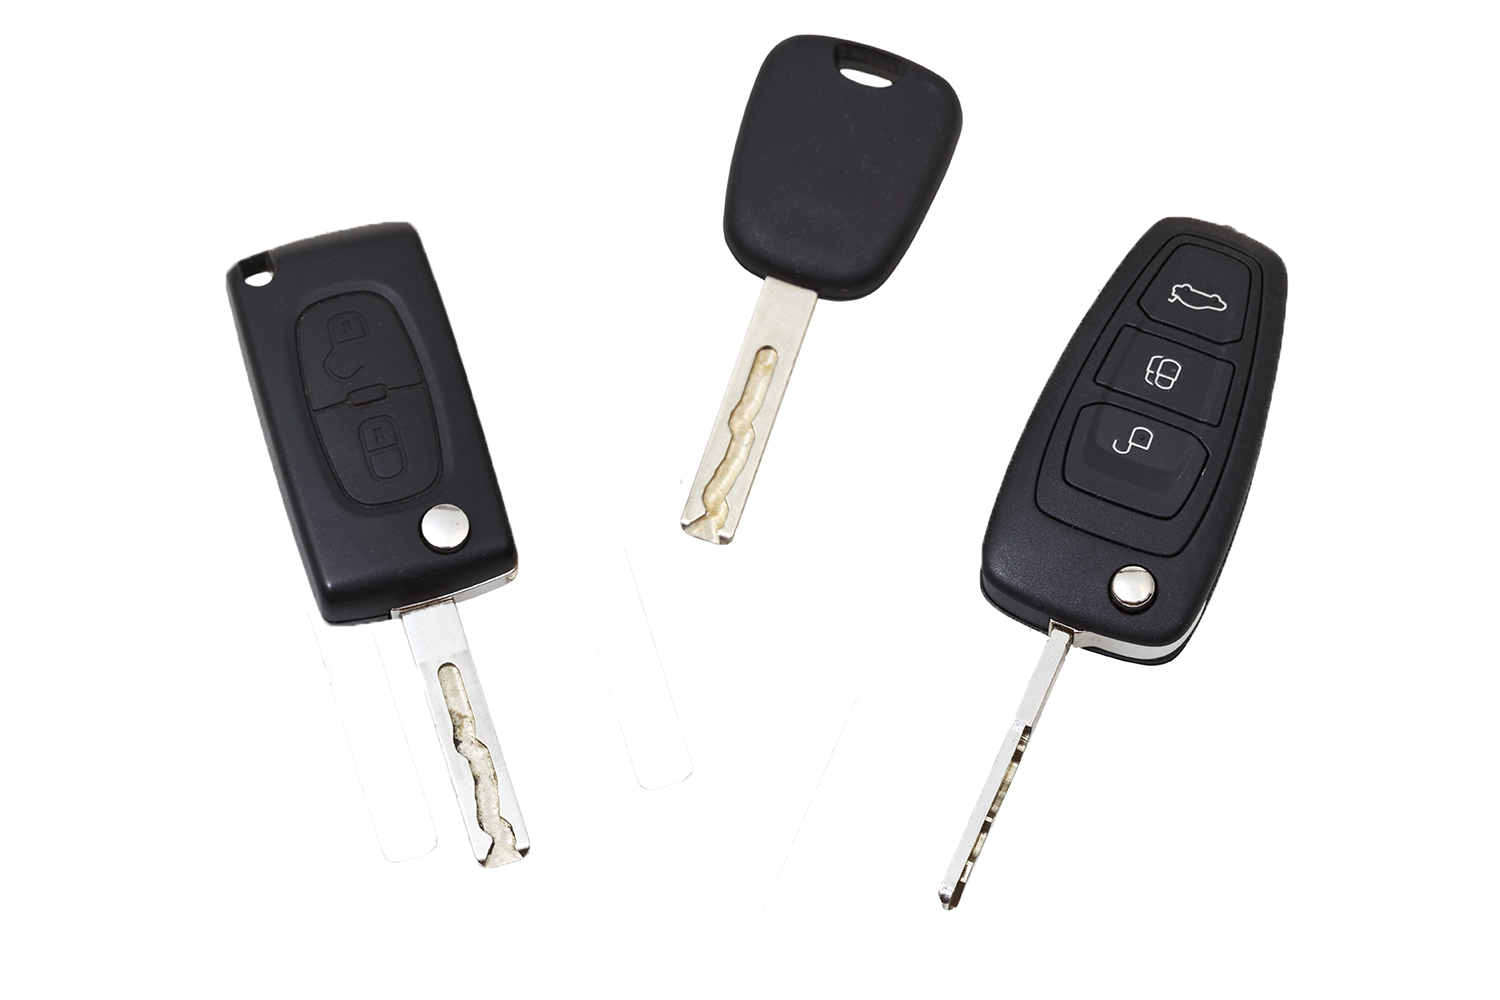 When you need new car keys, we're here for you!